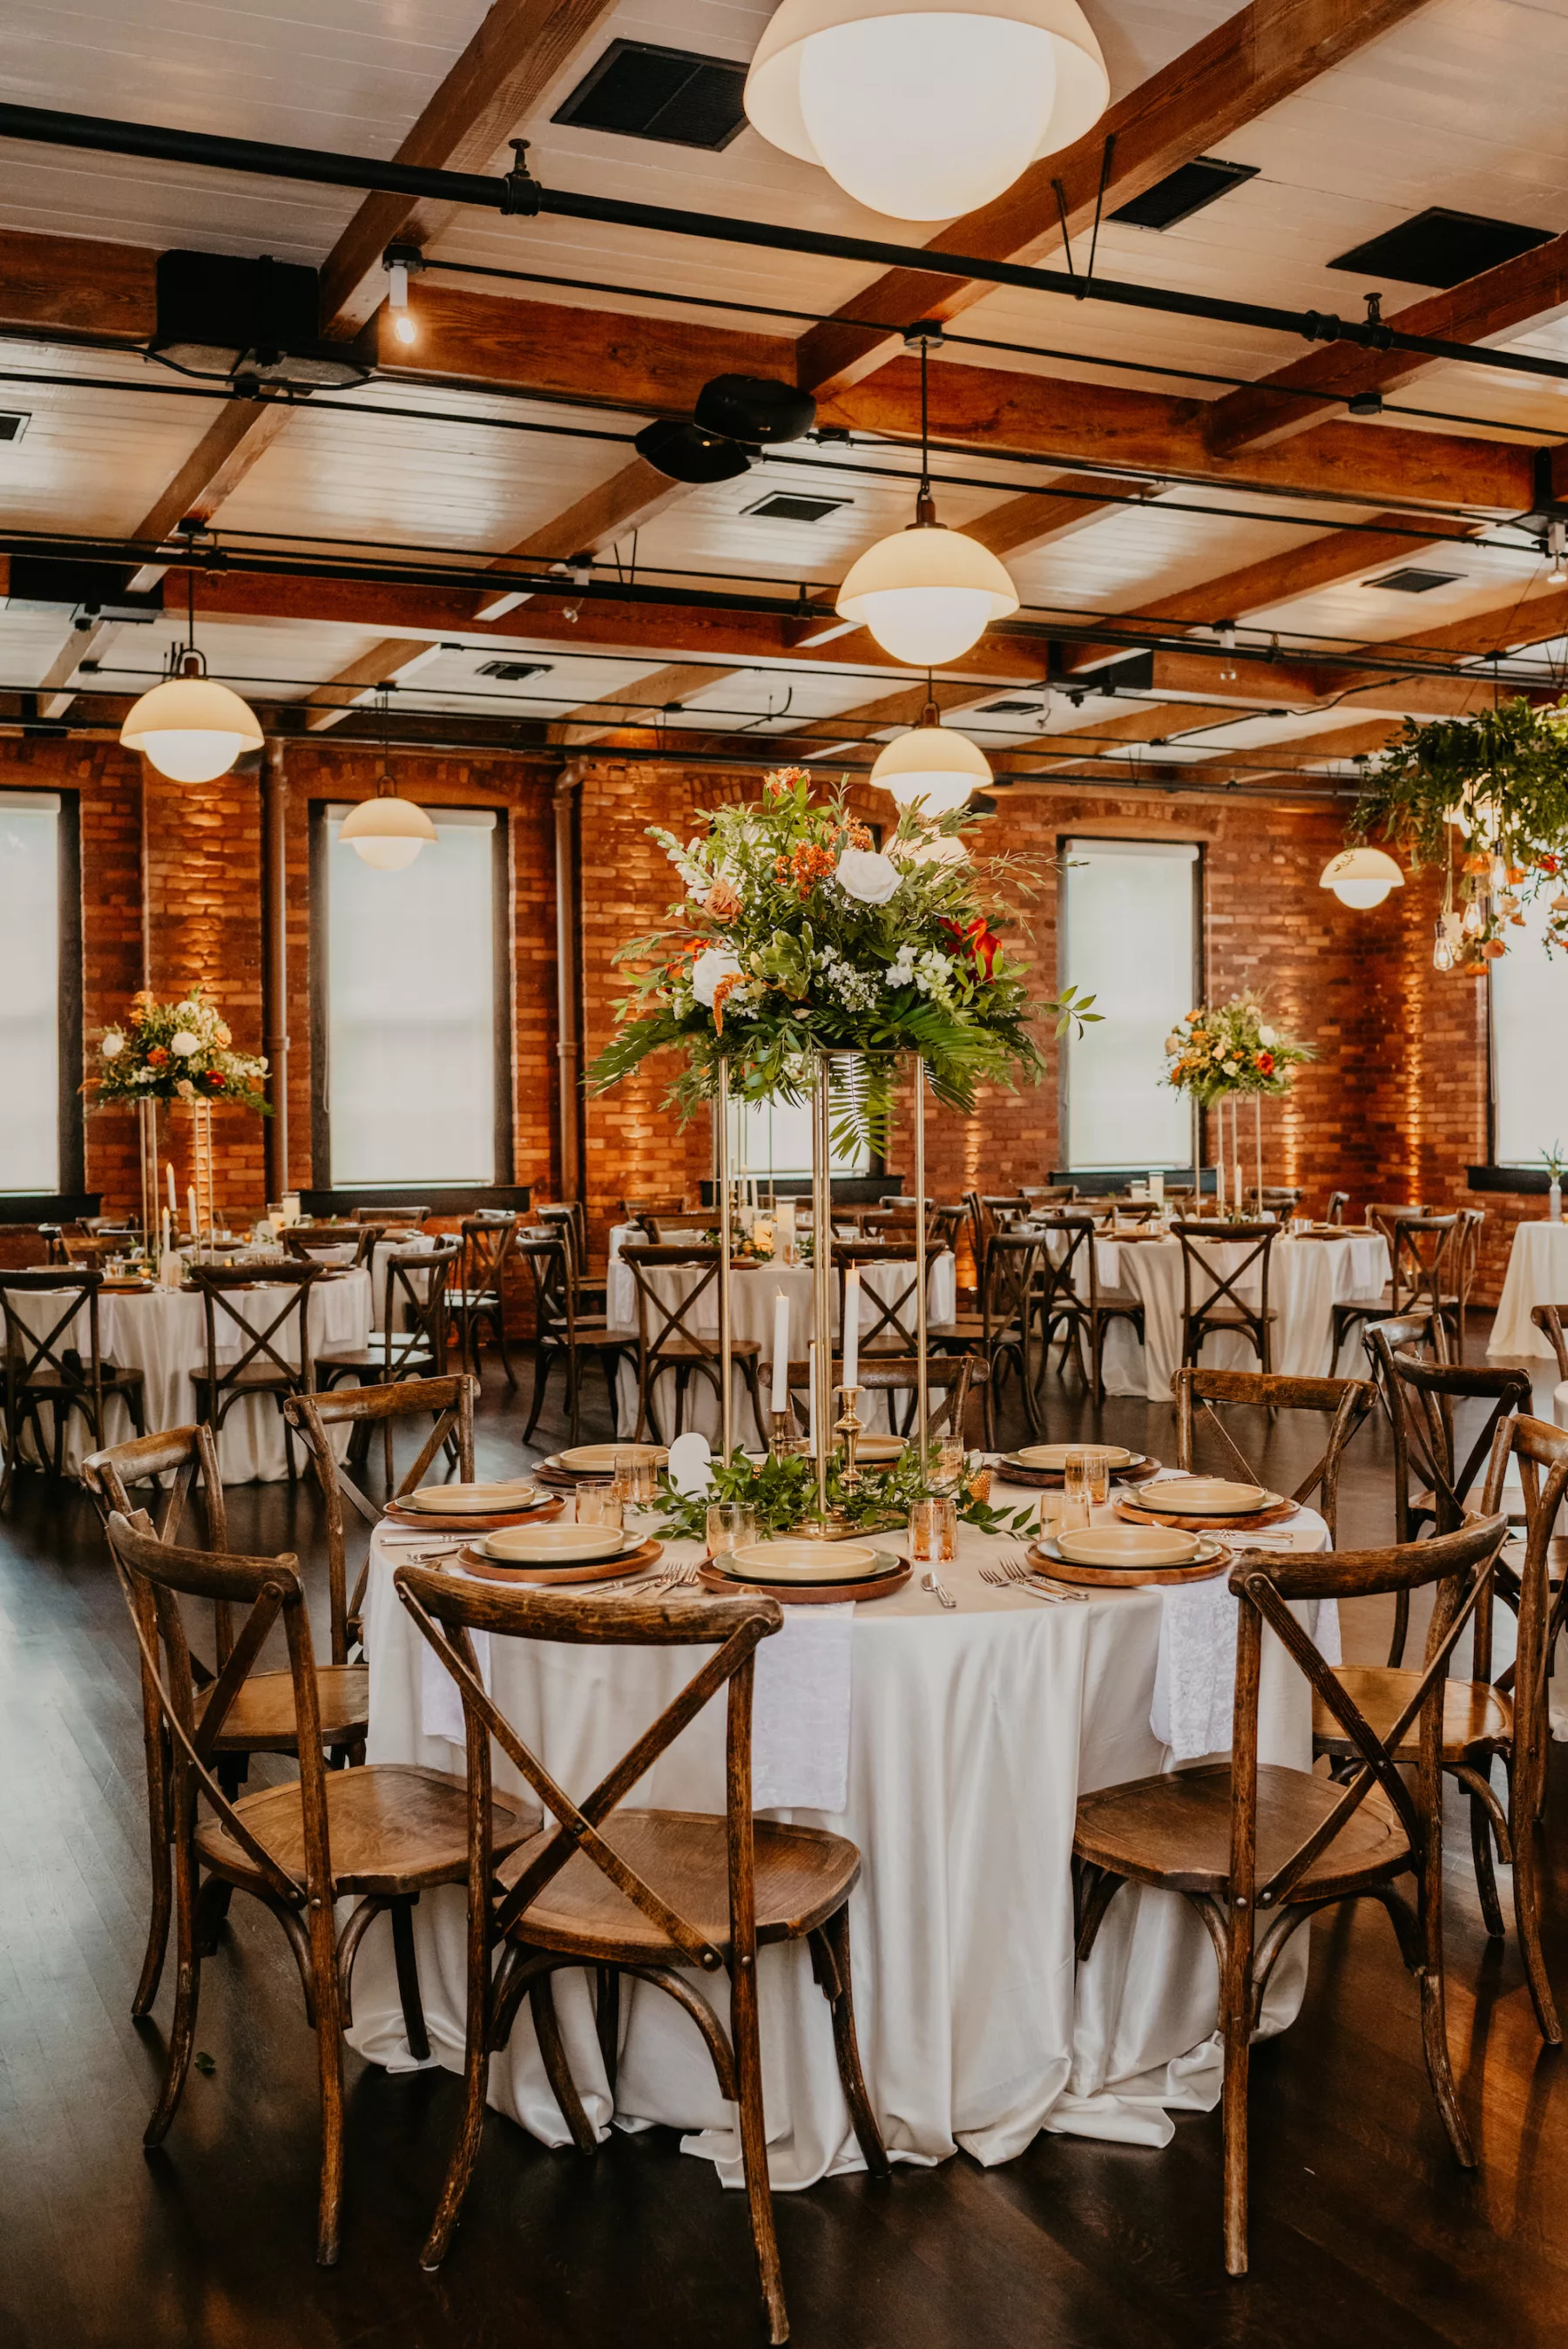 Boho Industrial Wedding Reception Inspiration | Gold Flower Stands with White Roses, Terracotta Amaranthus, and Greenery | Wooden Crossback Chairs | Tampa Bay Chair Kate Ryan Event Rentals | Historic Industrial Venue J.C. Newman Cigar Co. | Planner B Eventful